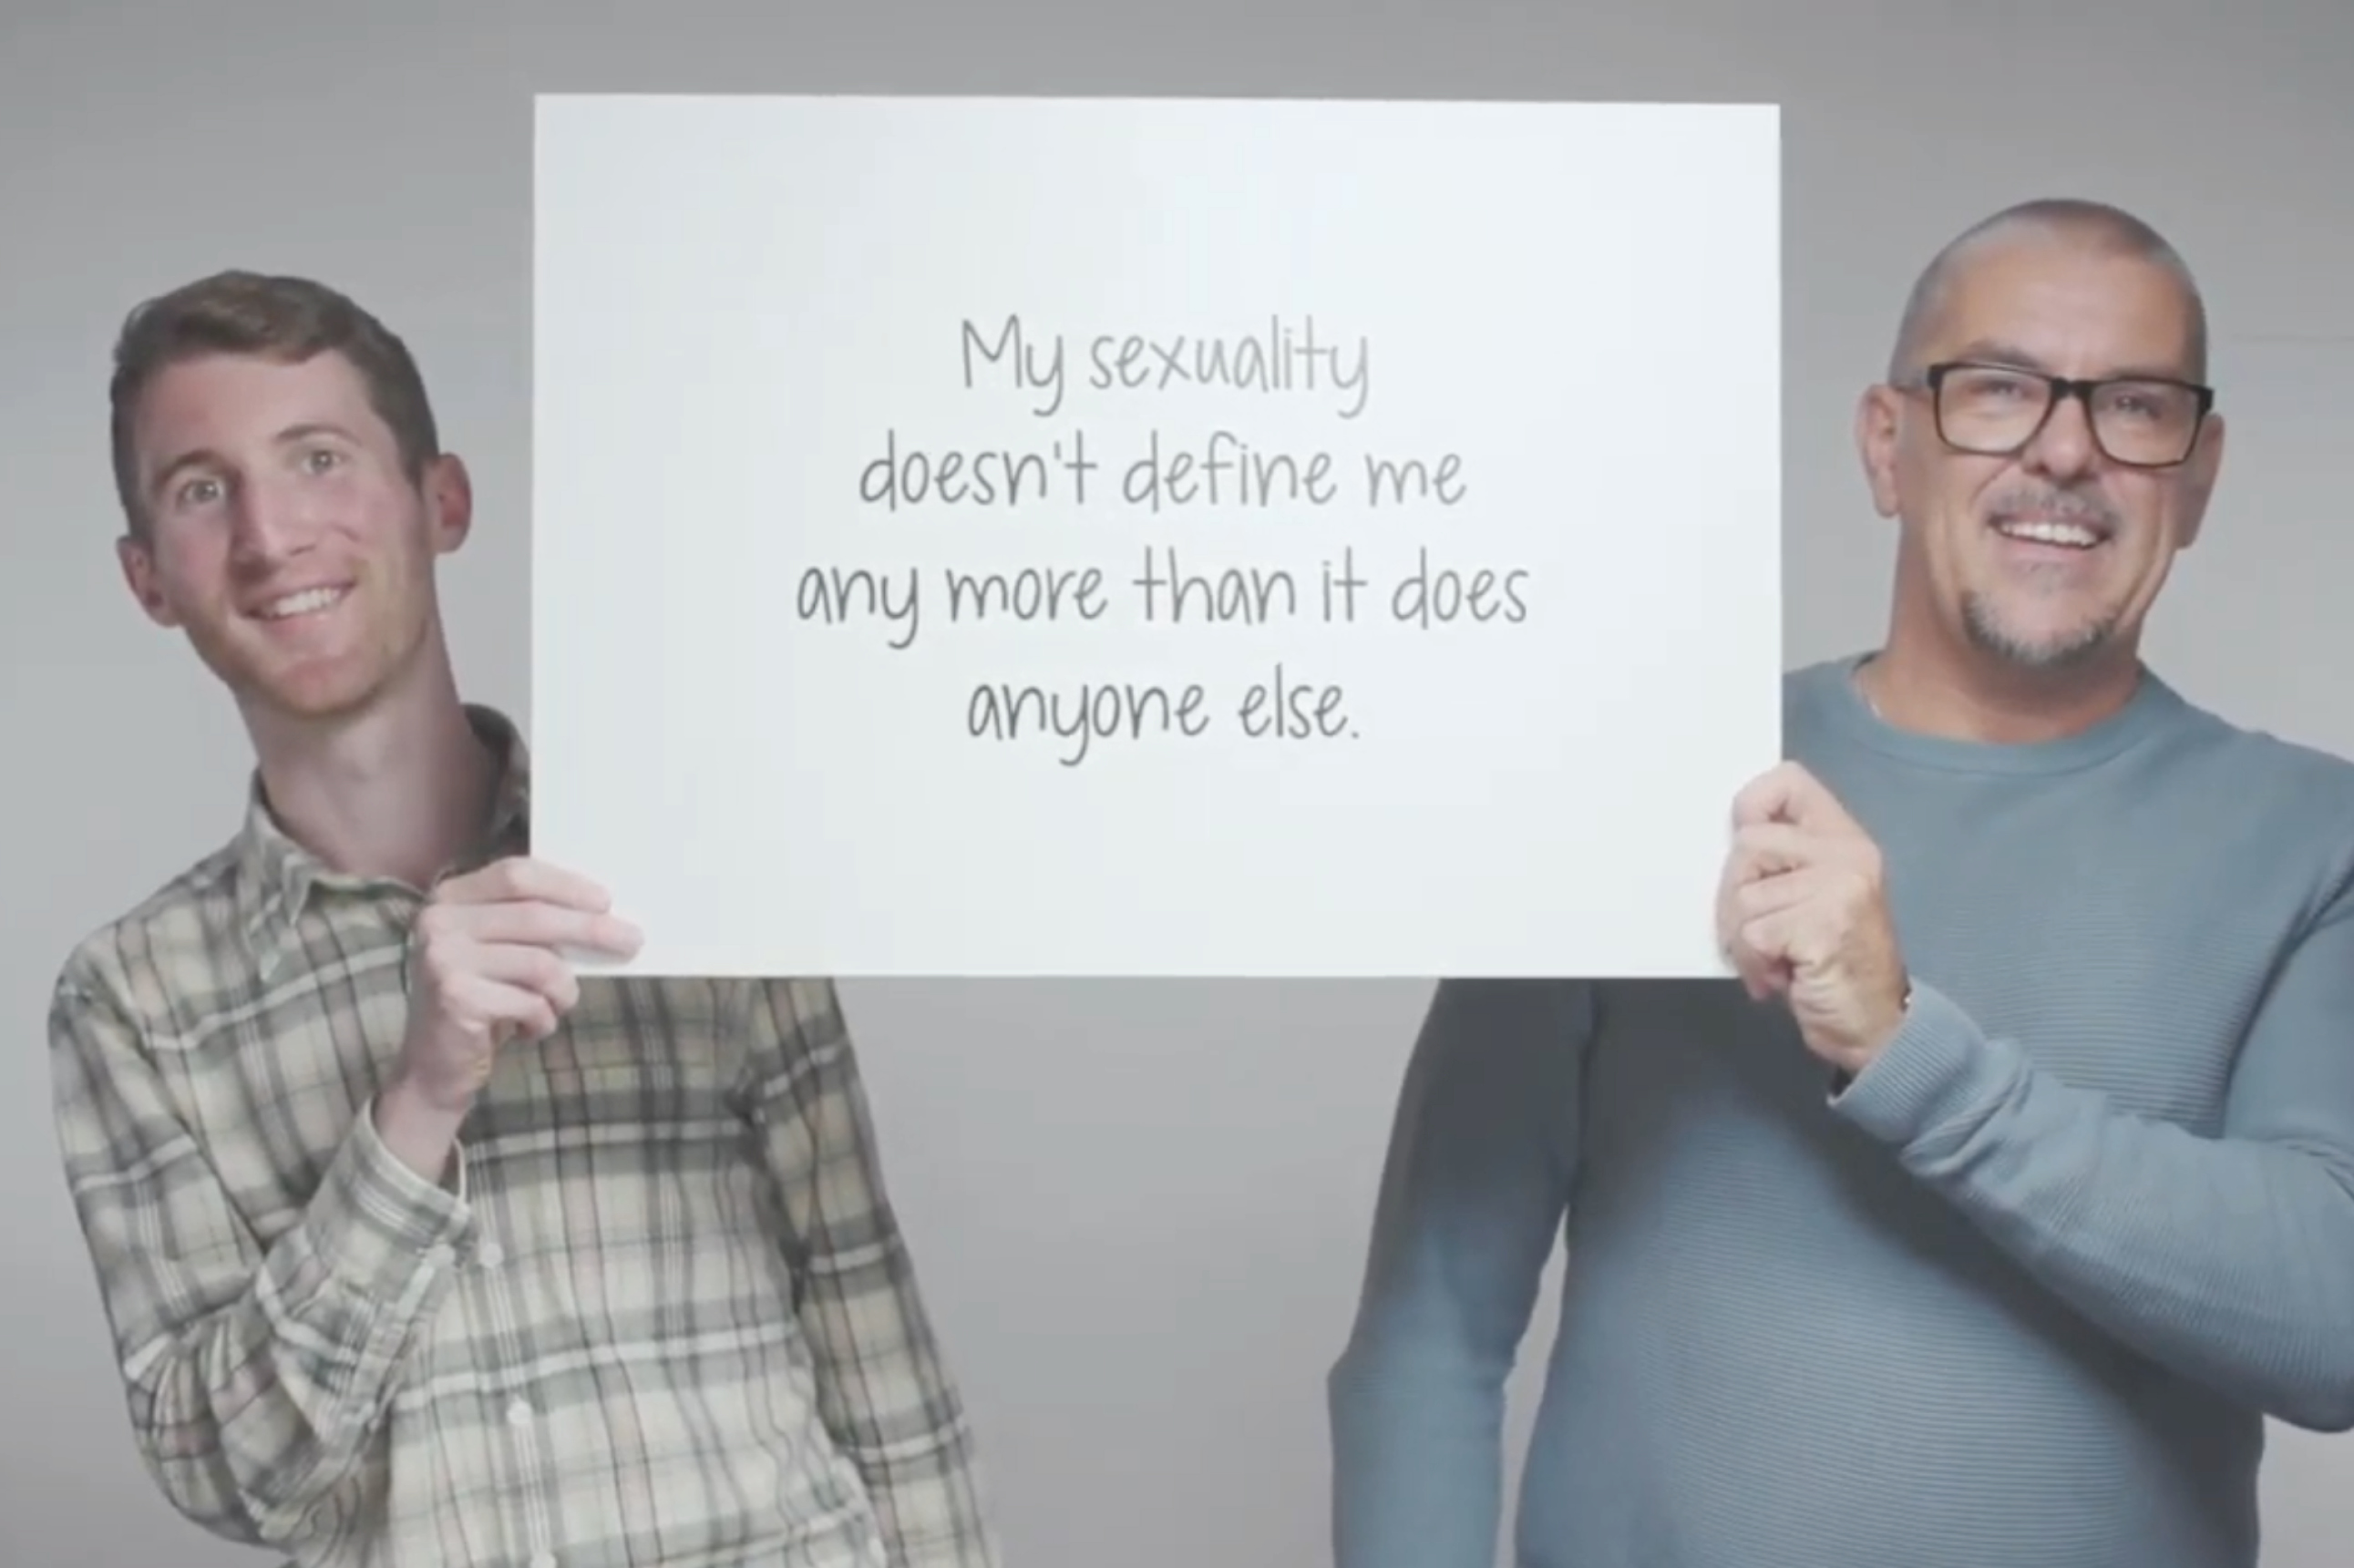 Still from a video featuring two smiling, adult men either side of a large white card they’re holding up between them. The card features the text “My sexuality doesn’t definite any more than it does anyone else”.